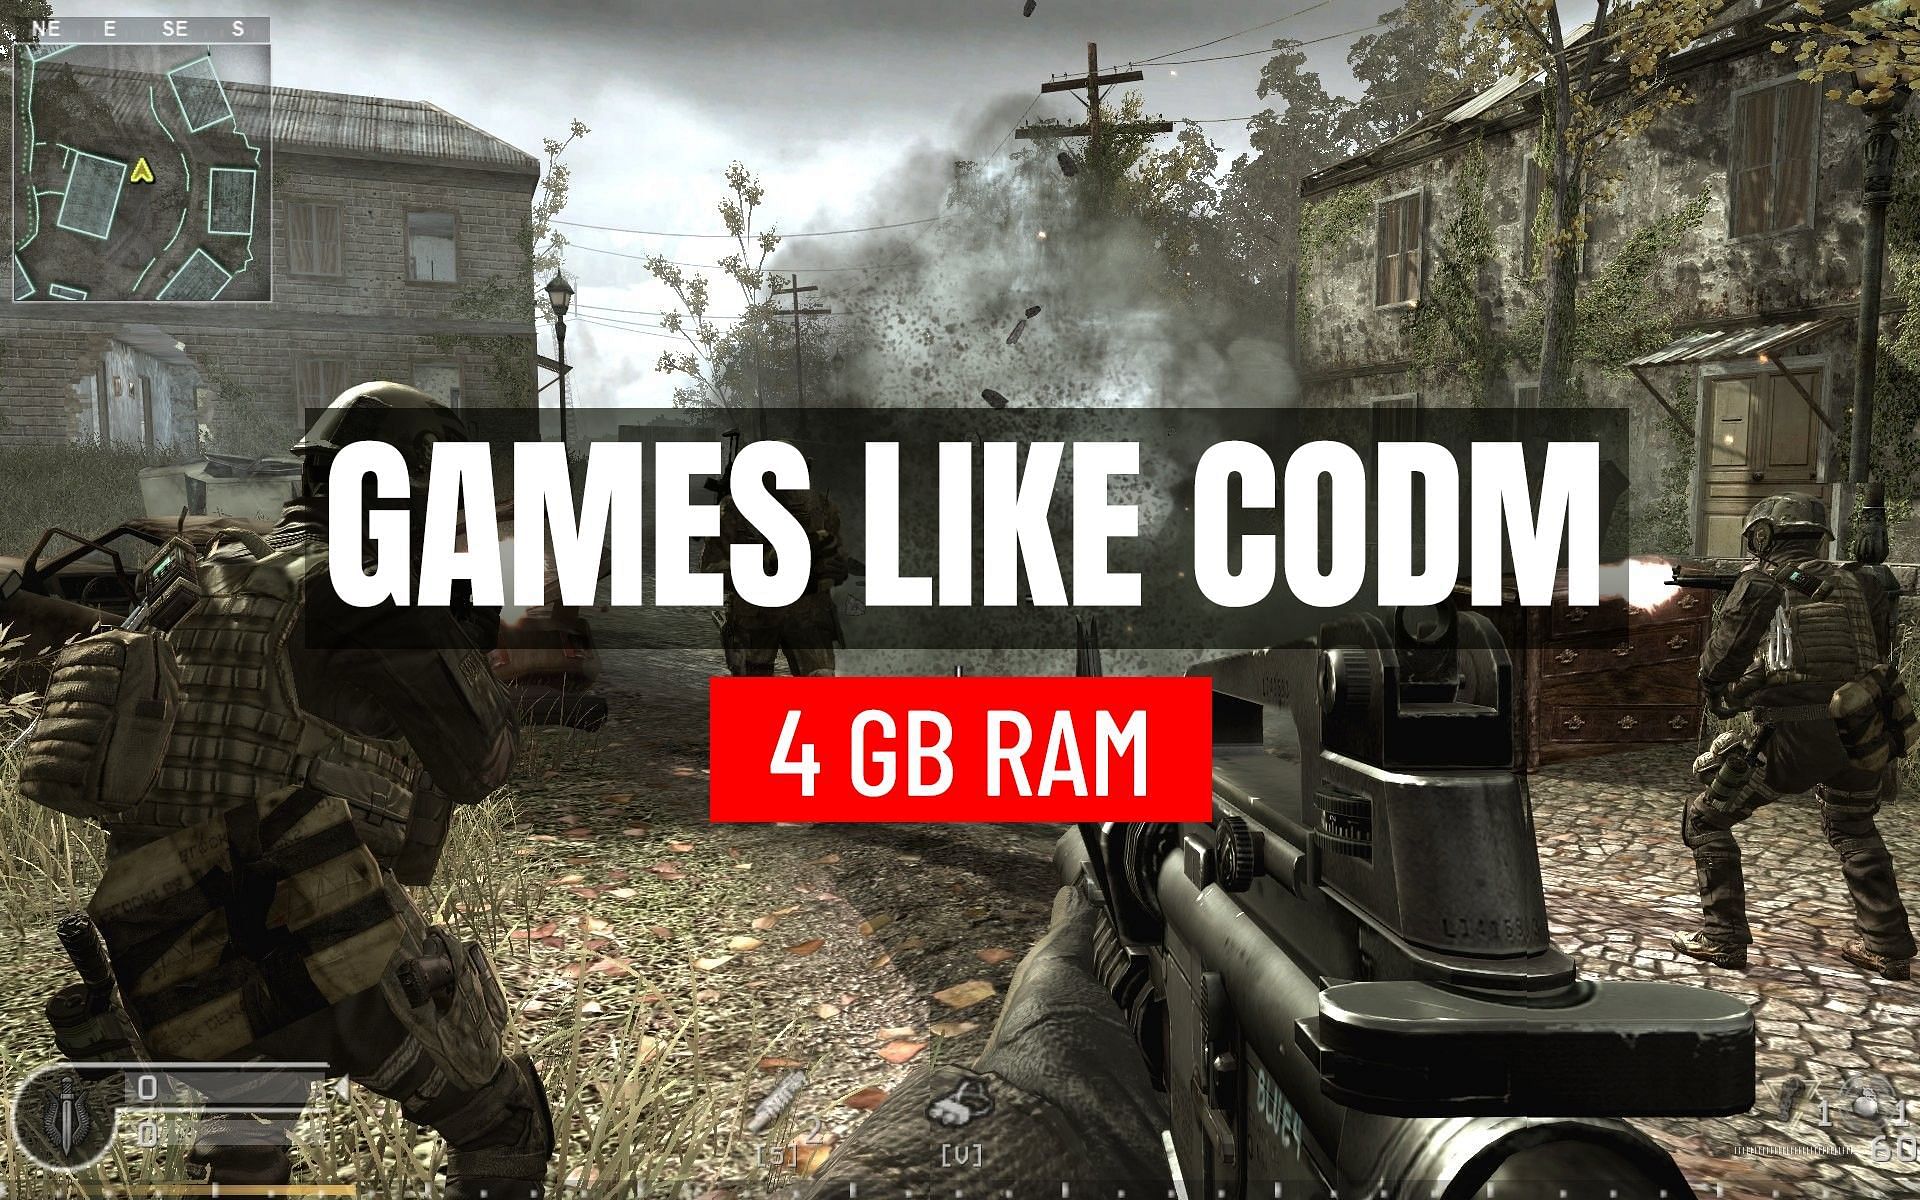 5 best free Battle Royale games like COD Mobile for 4 GB RAM Android (2021)